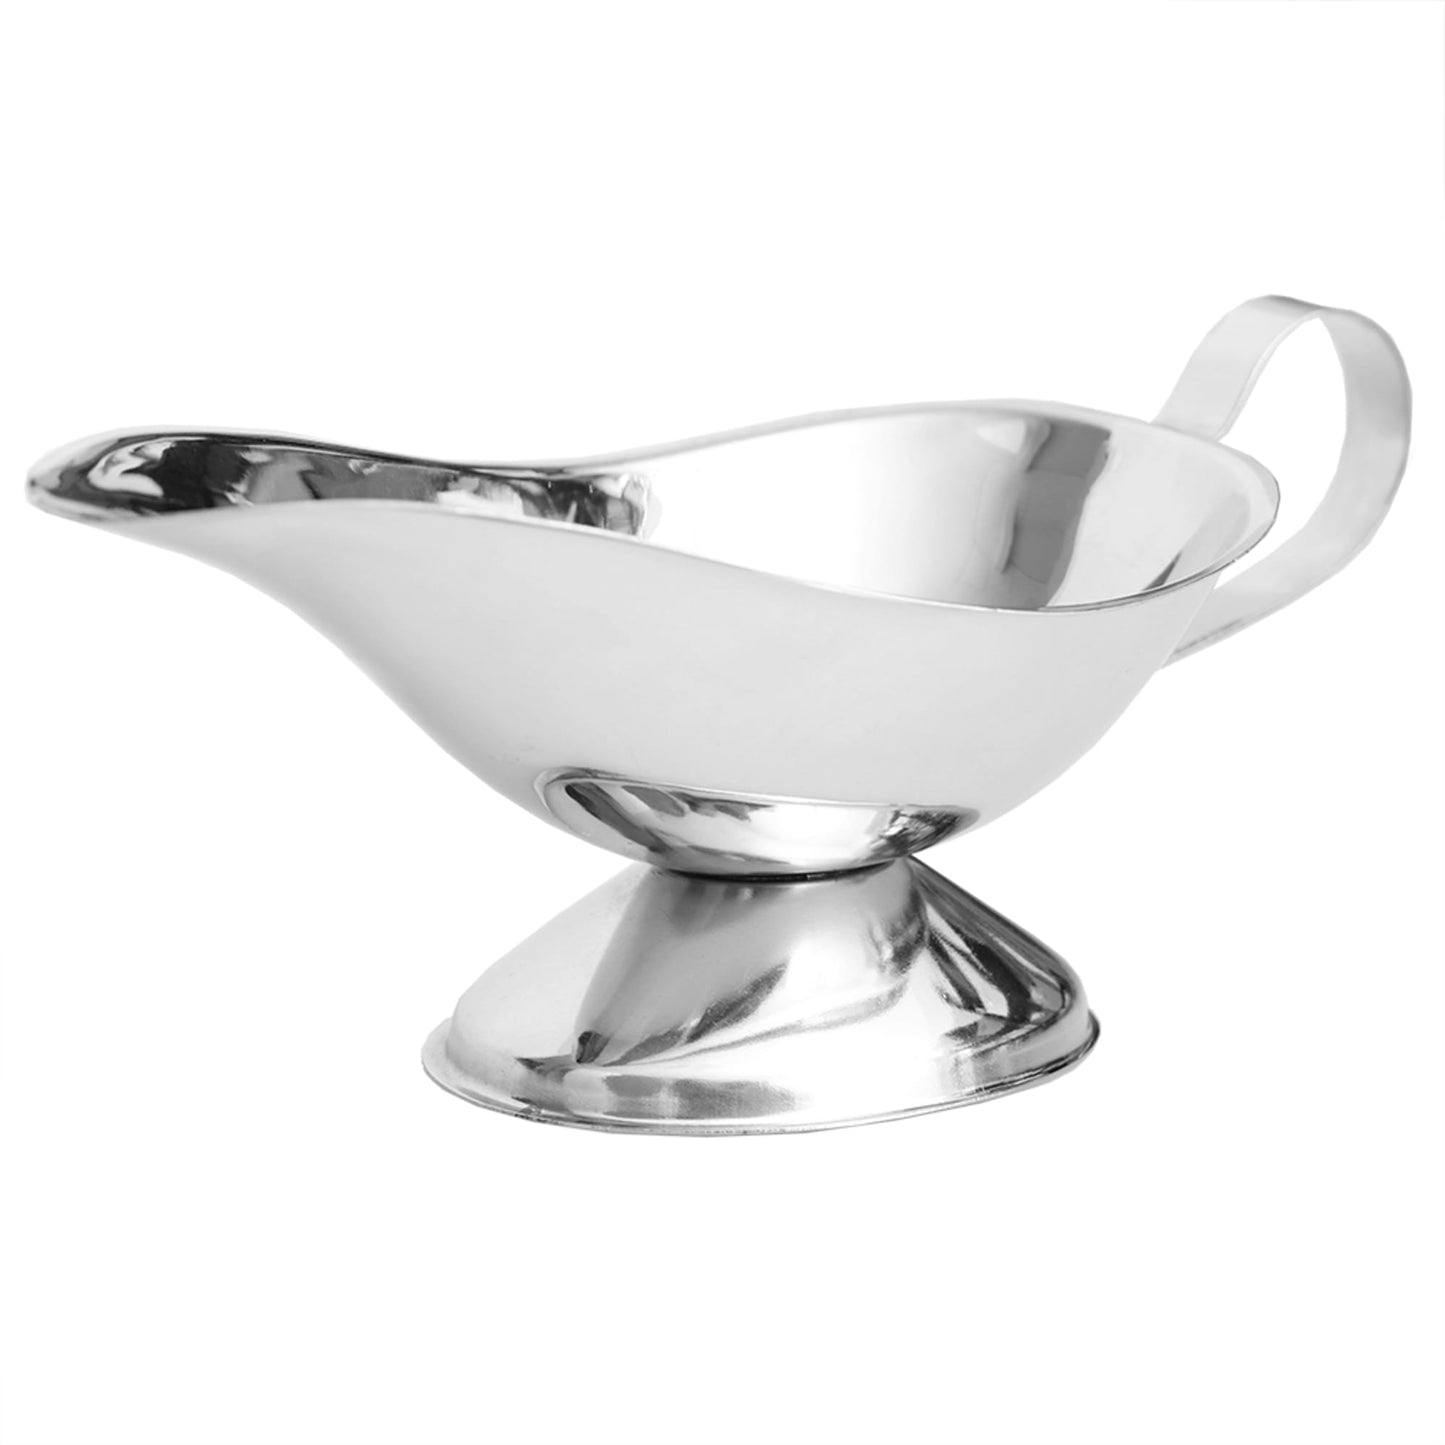 Large Capacity Stainless Steel Gravy Boat, Silver